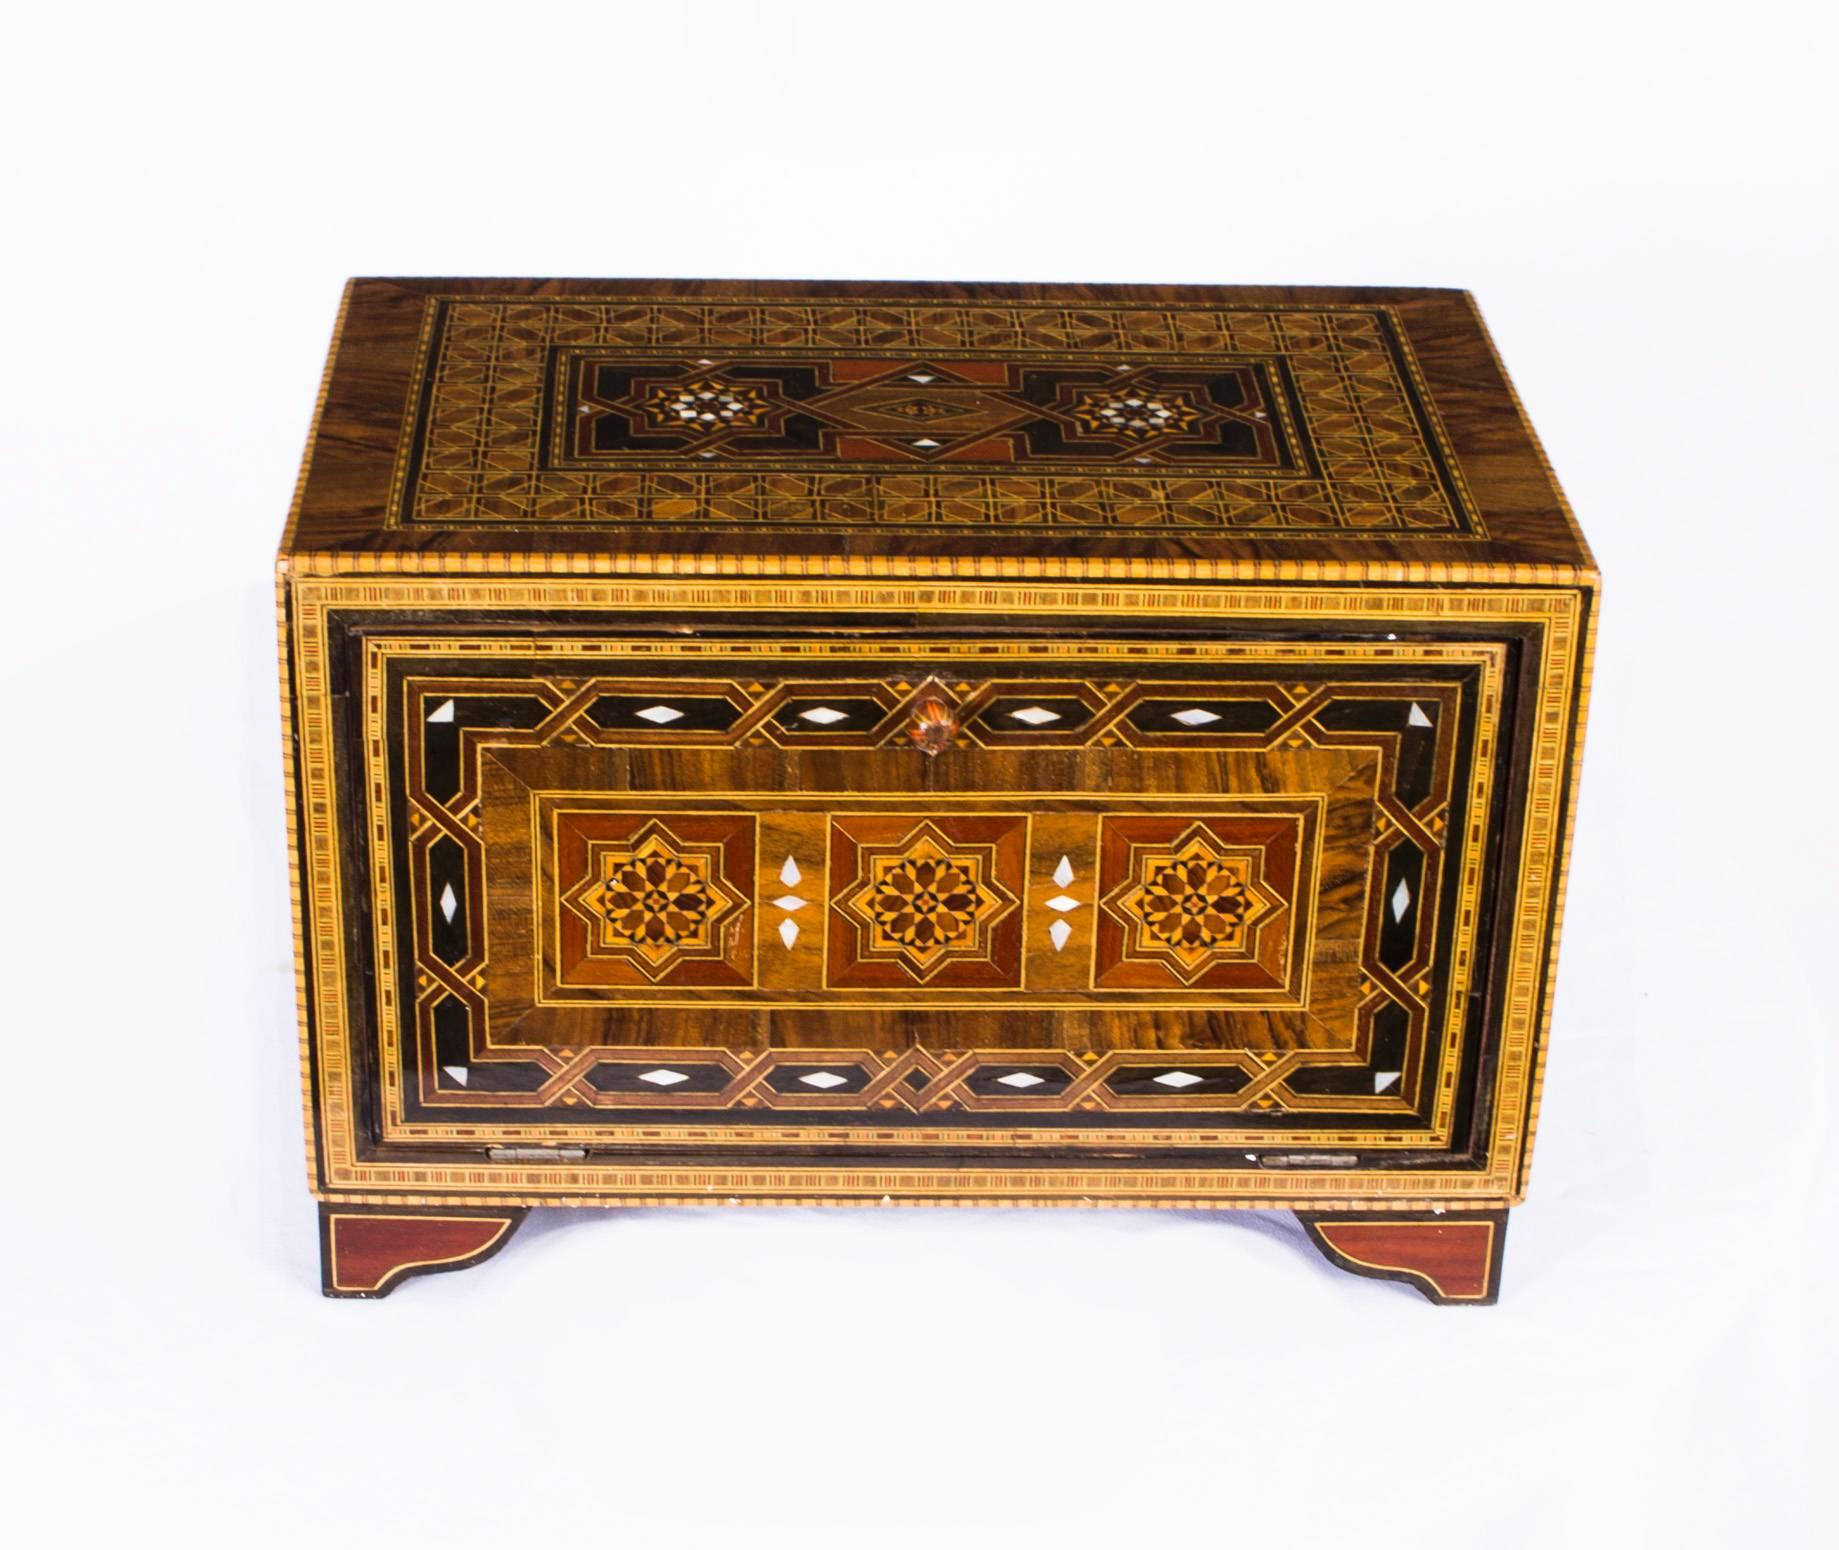 This is a superb intricately inlaid Islamic table cabinet decorated with mother-of-pearl and specimen woods from Damascus and dating from the second quarter of the 20th century.

This beautifully detailed inlaid parquetry cabinet features